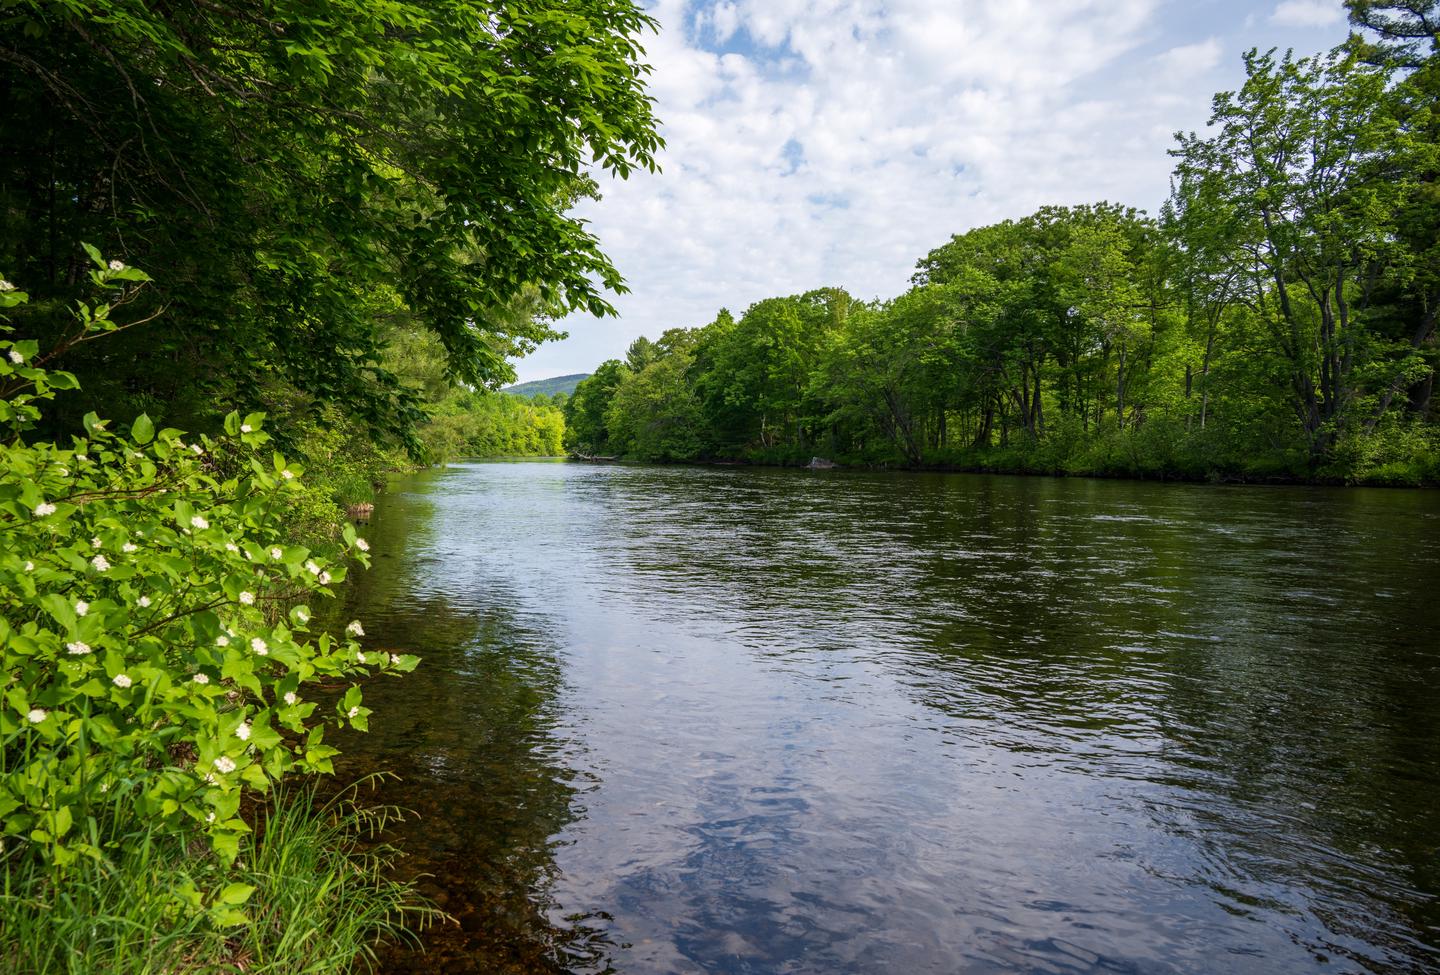 A viewpoint of the East Branch of the Penobscot River from the shore of Upper East Branch Campsite. The river is calm on a cloudy day. Both sides of the river have dense green vegetation.Upper East Branch Campsite provides scenic views during the day and night. Remember to look up at night for an expansive night sky experience.